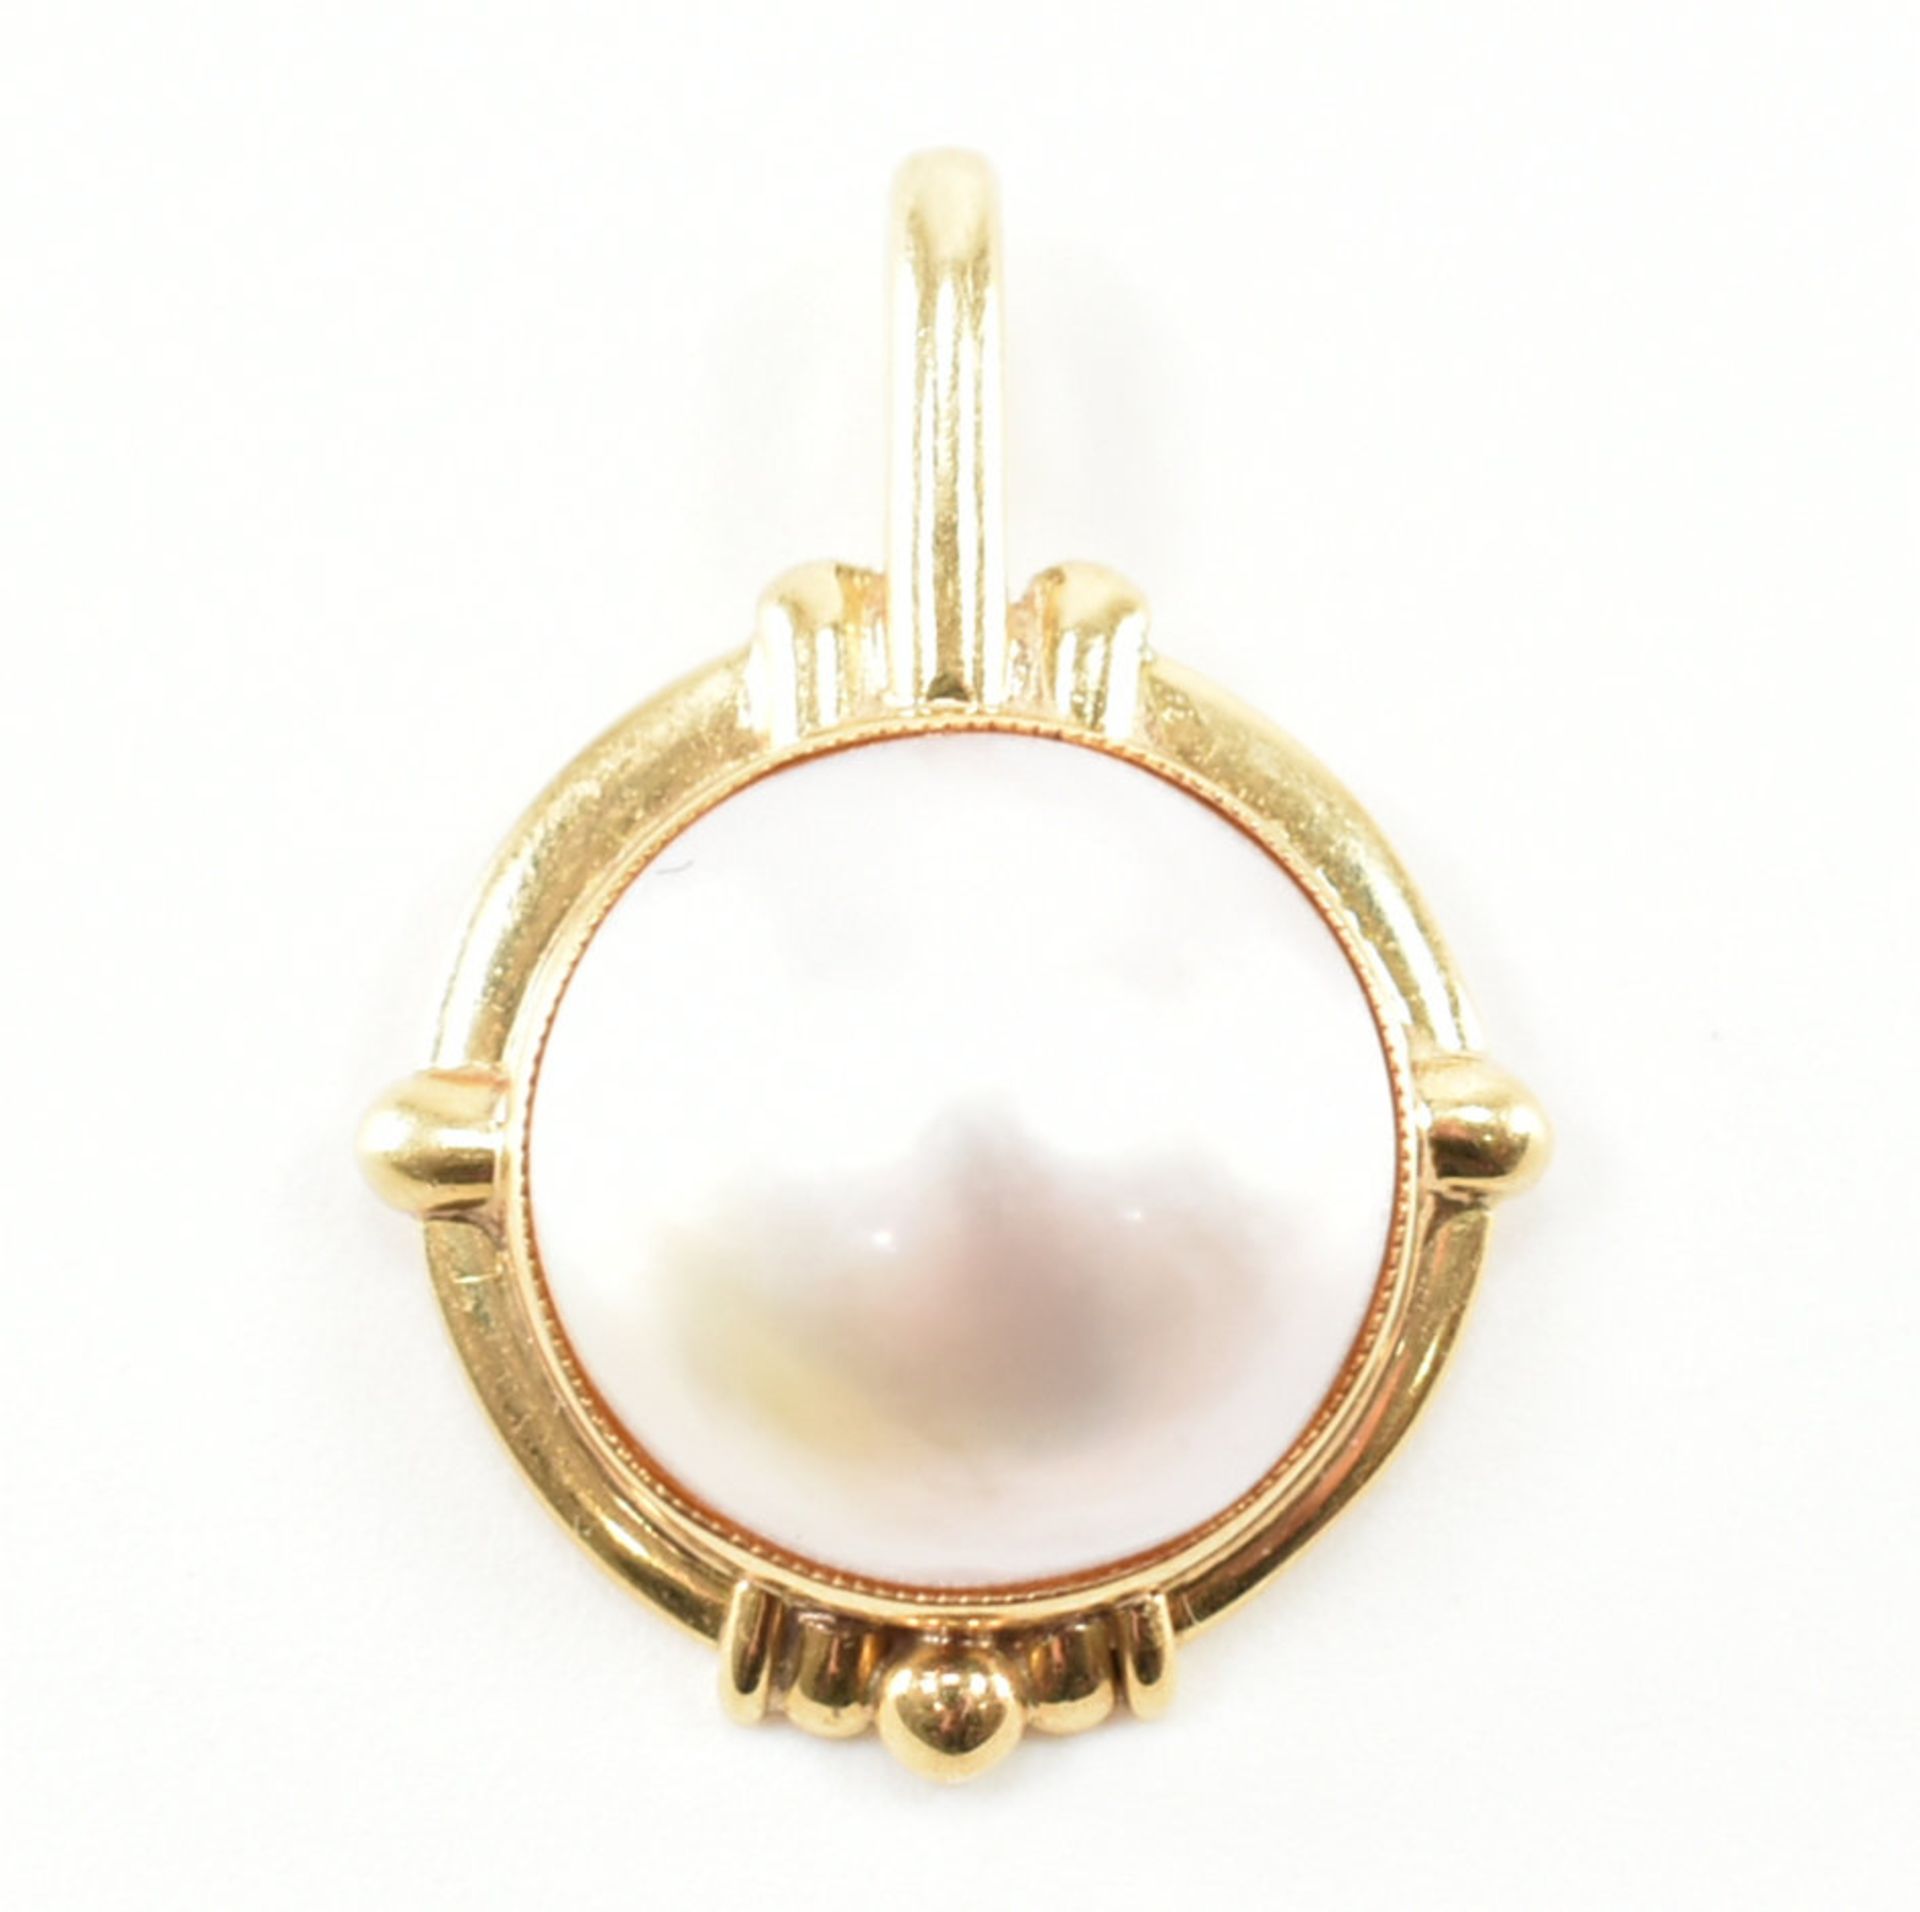 18CT GOLD & MABE PEARL NECKLACE PENDANT